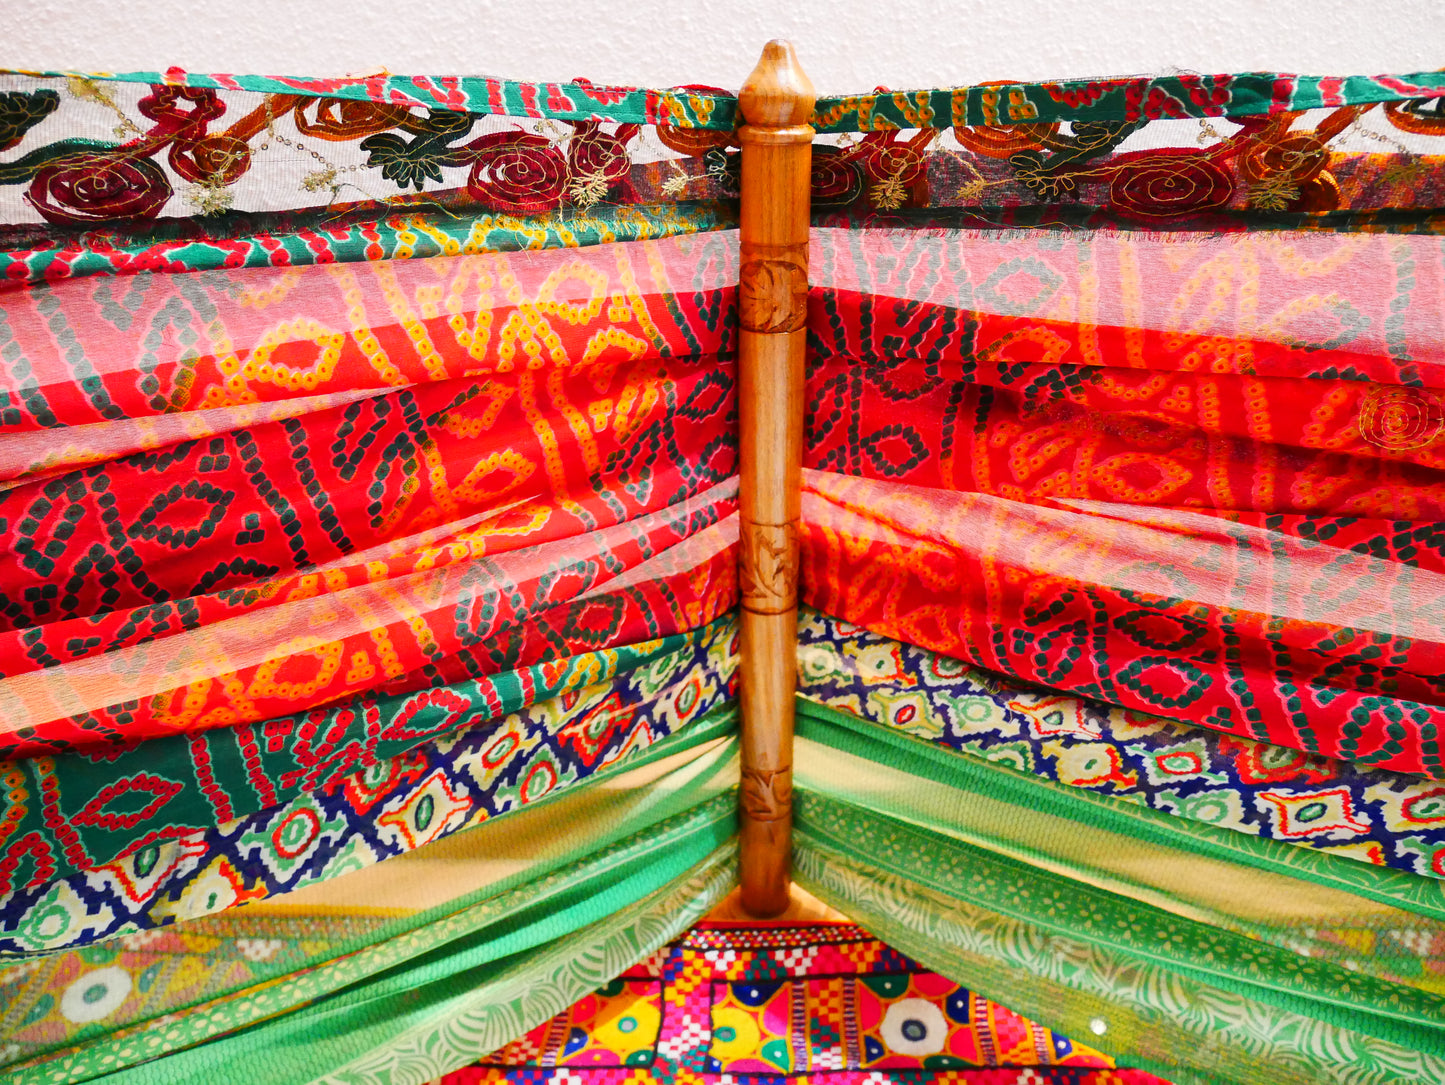 Saree Bed canopy - with handcrafted walnut wood rods and vintage Indian sarees